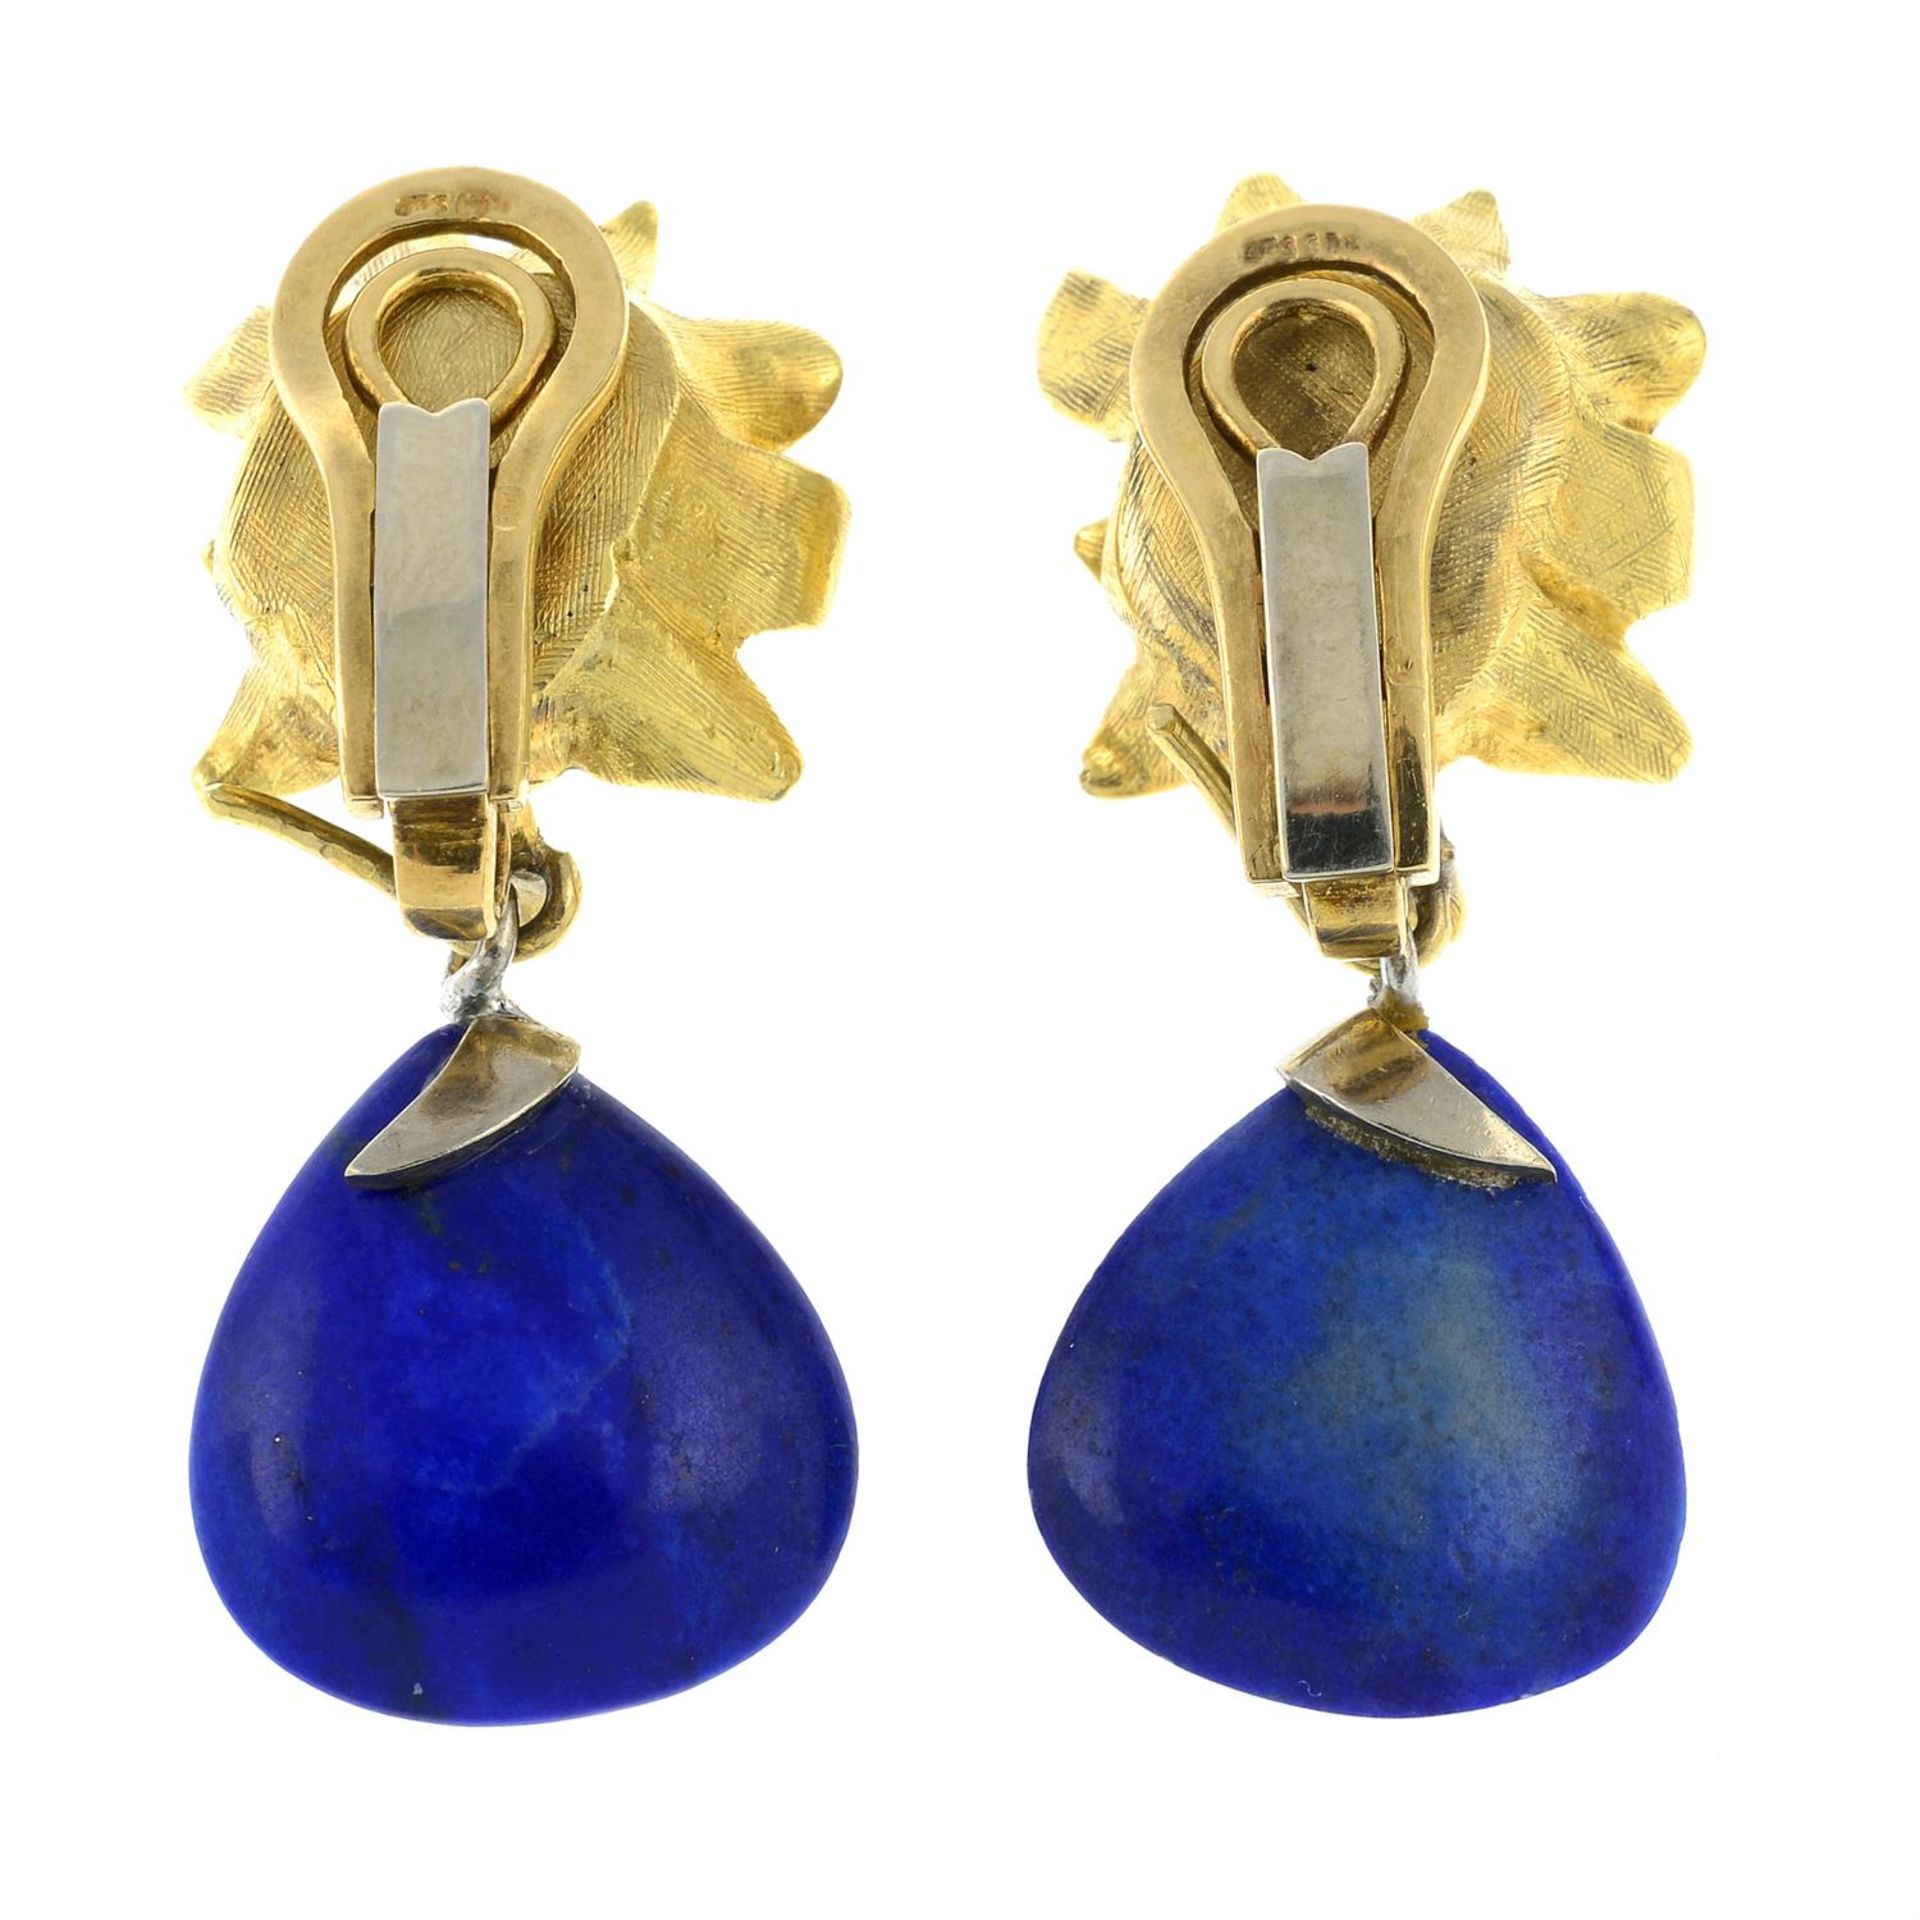 A pair of mid 20th century gold brilliant-cut diamond textured floral earrings, suspending a - Image 3 of 3